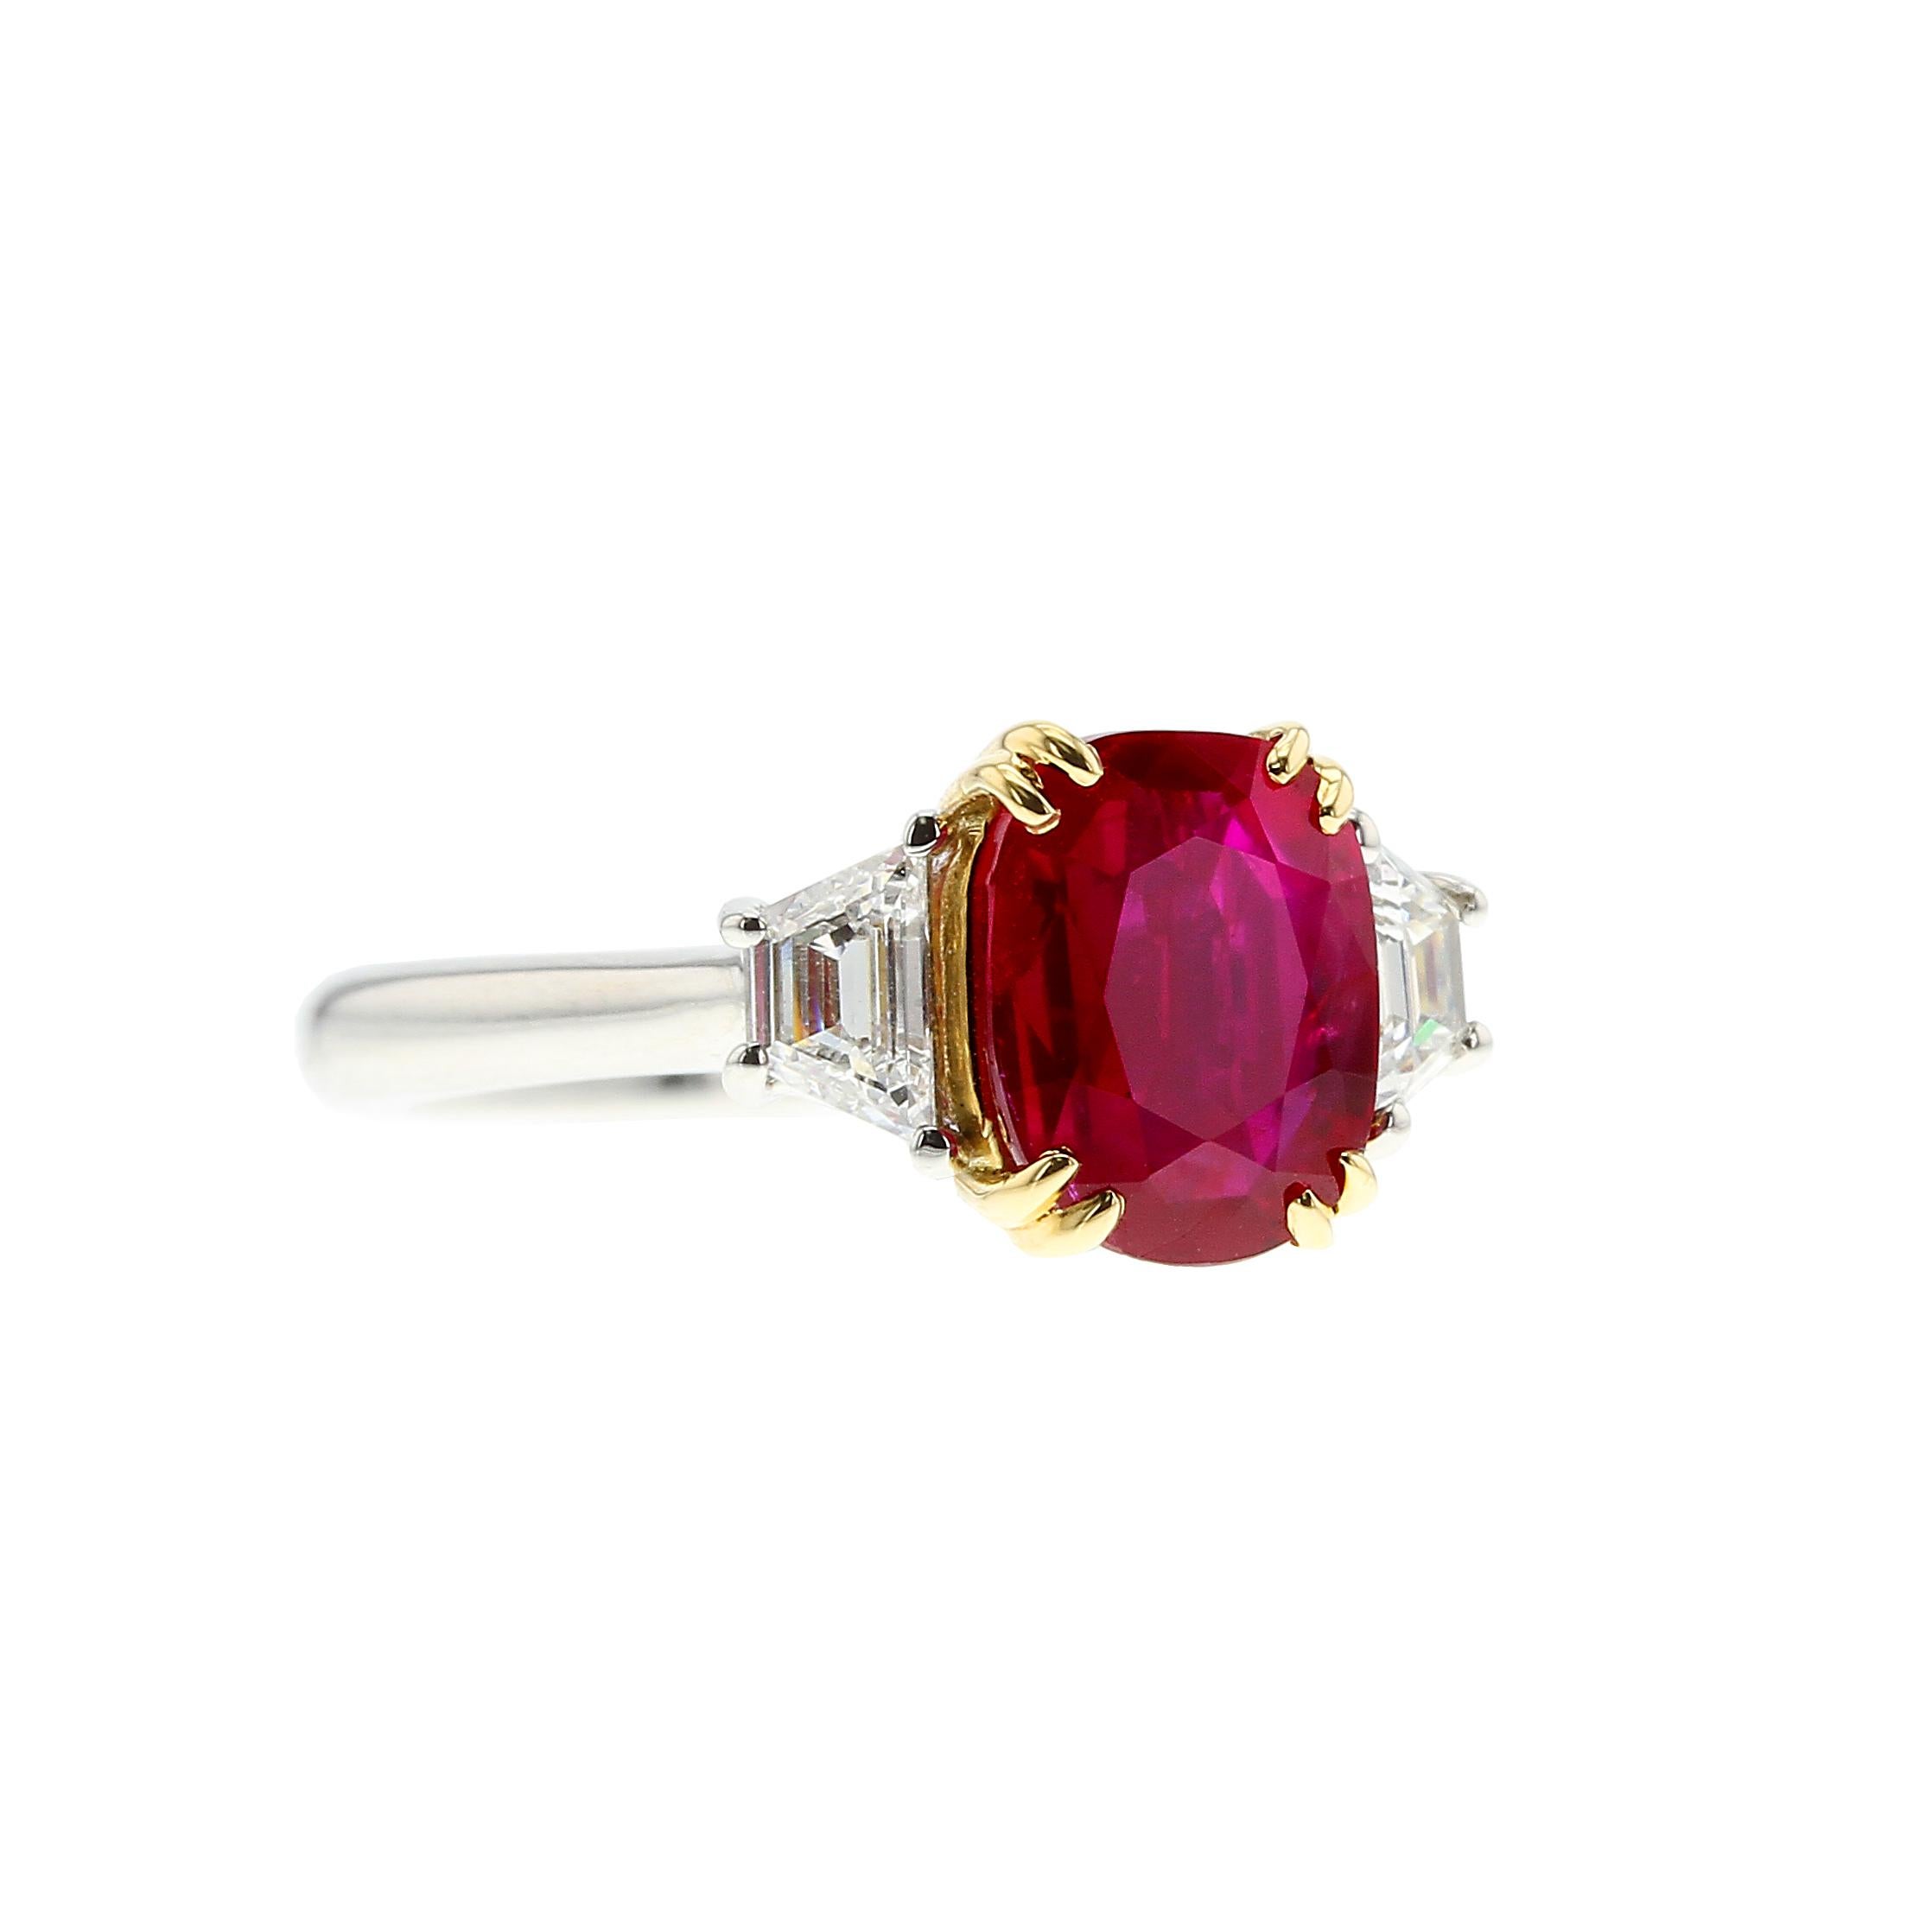 A classic three-stone ring set with a natural, no-heat Burmese ruby weighing over 2.50 carats, further accented with two trapezoid-shaped diamonds weighing a total of 0.42 cts. of an estimated color-clarity of F-VS2, set in Platinum and 18k Yellow